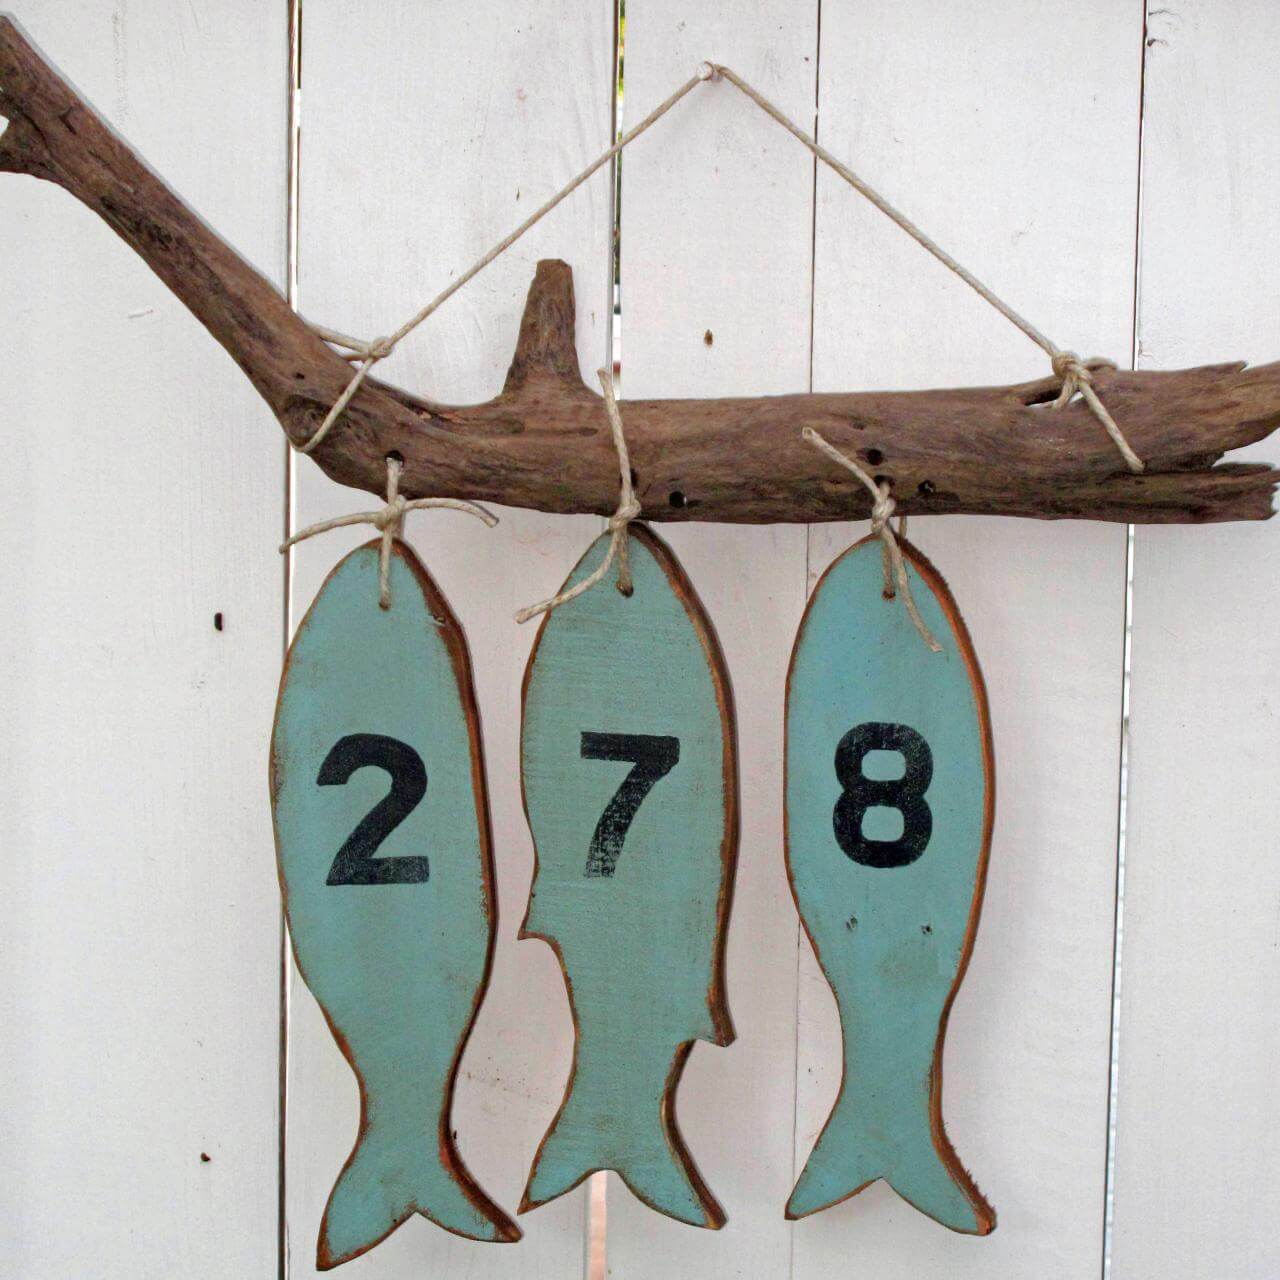 Rustic Branch with a Hanging Fish Display